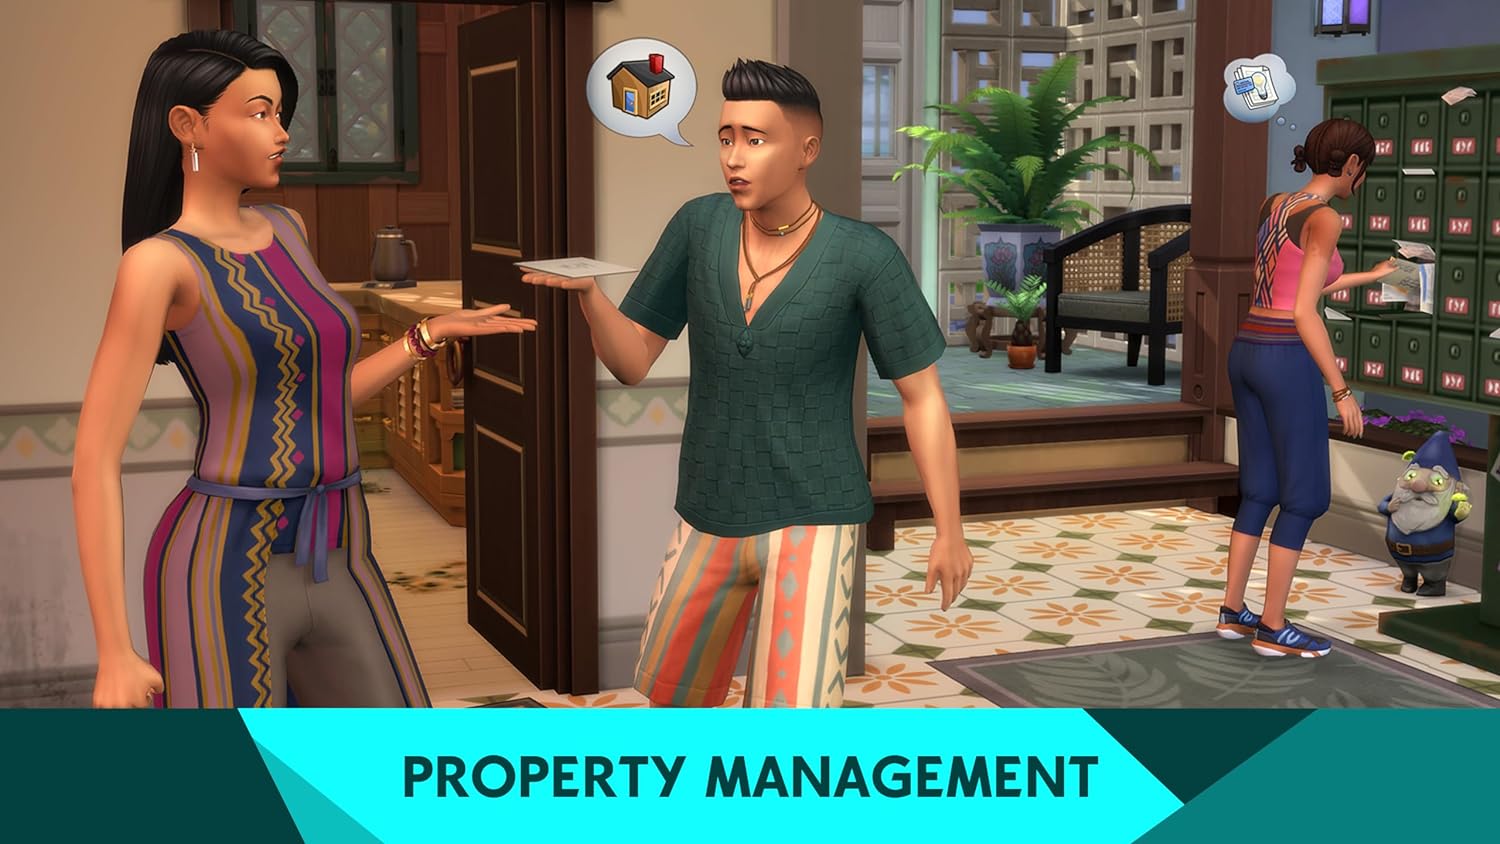 The Sims 4: For Rent Expansion Pack